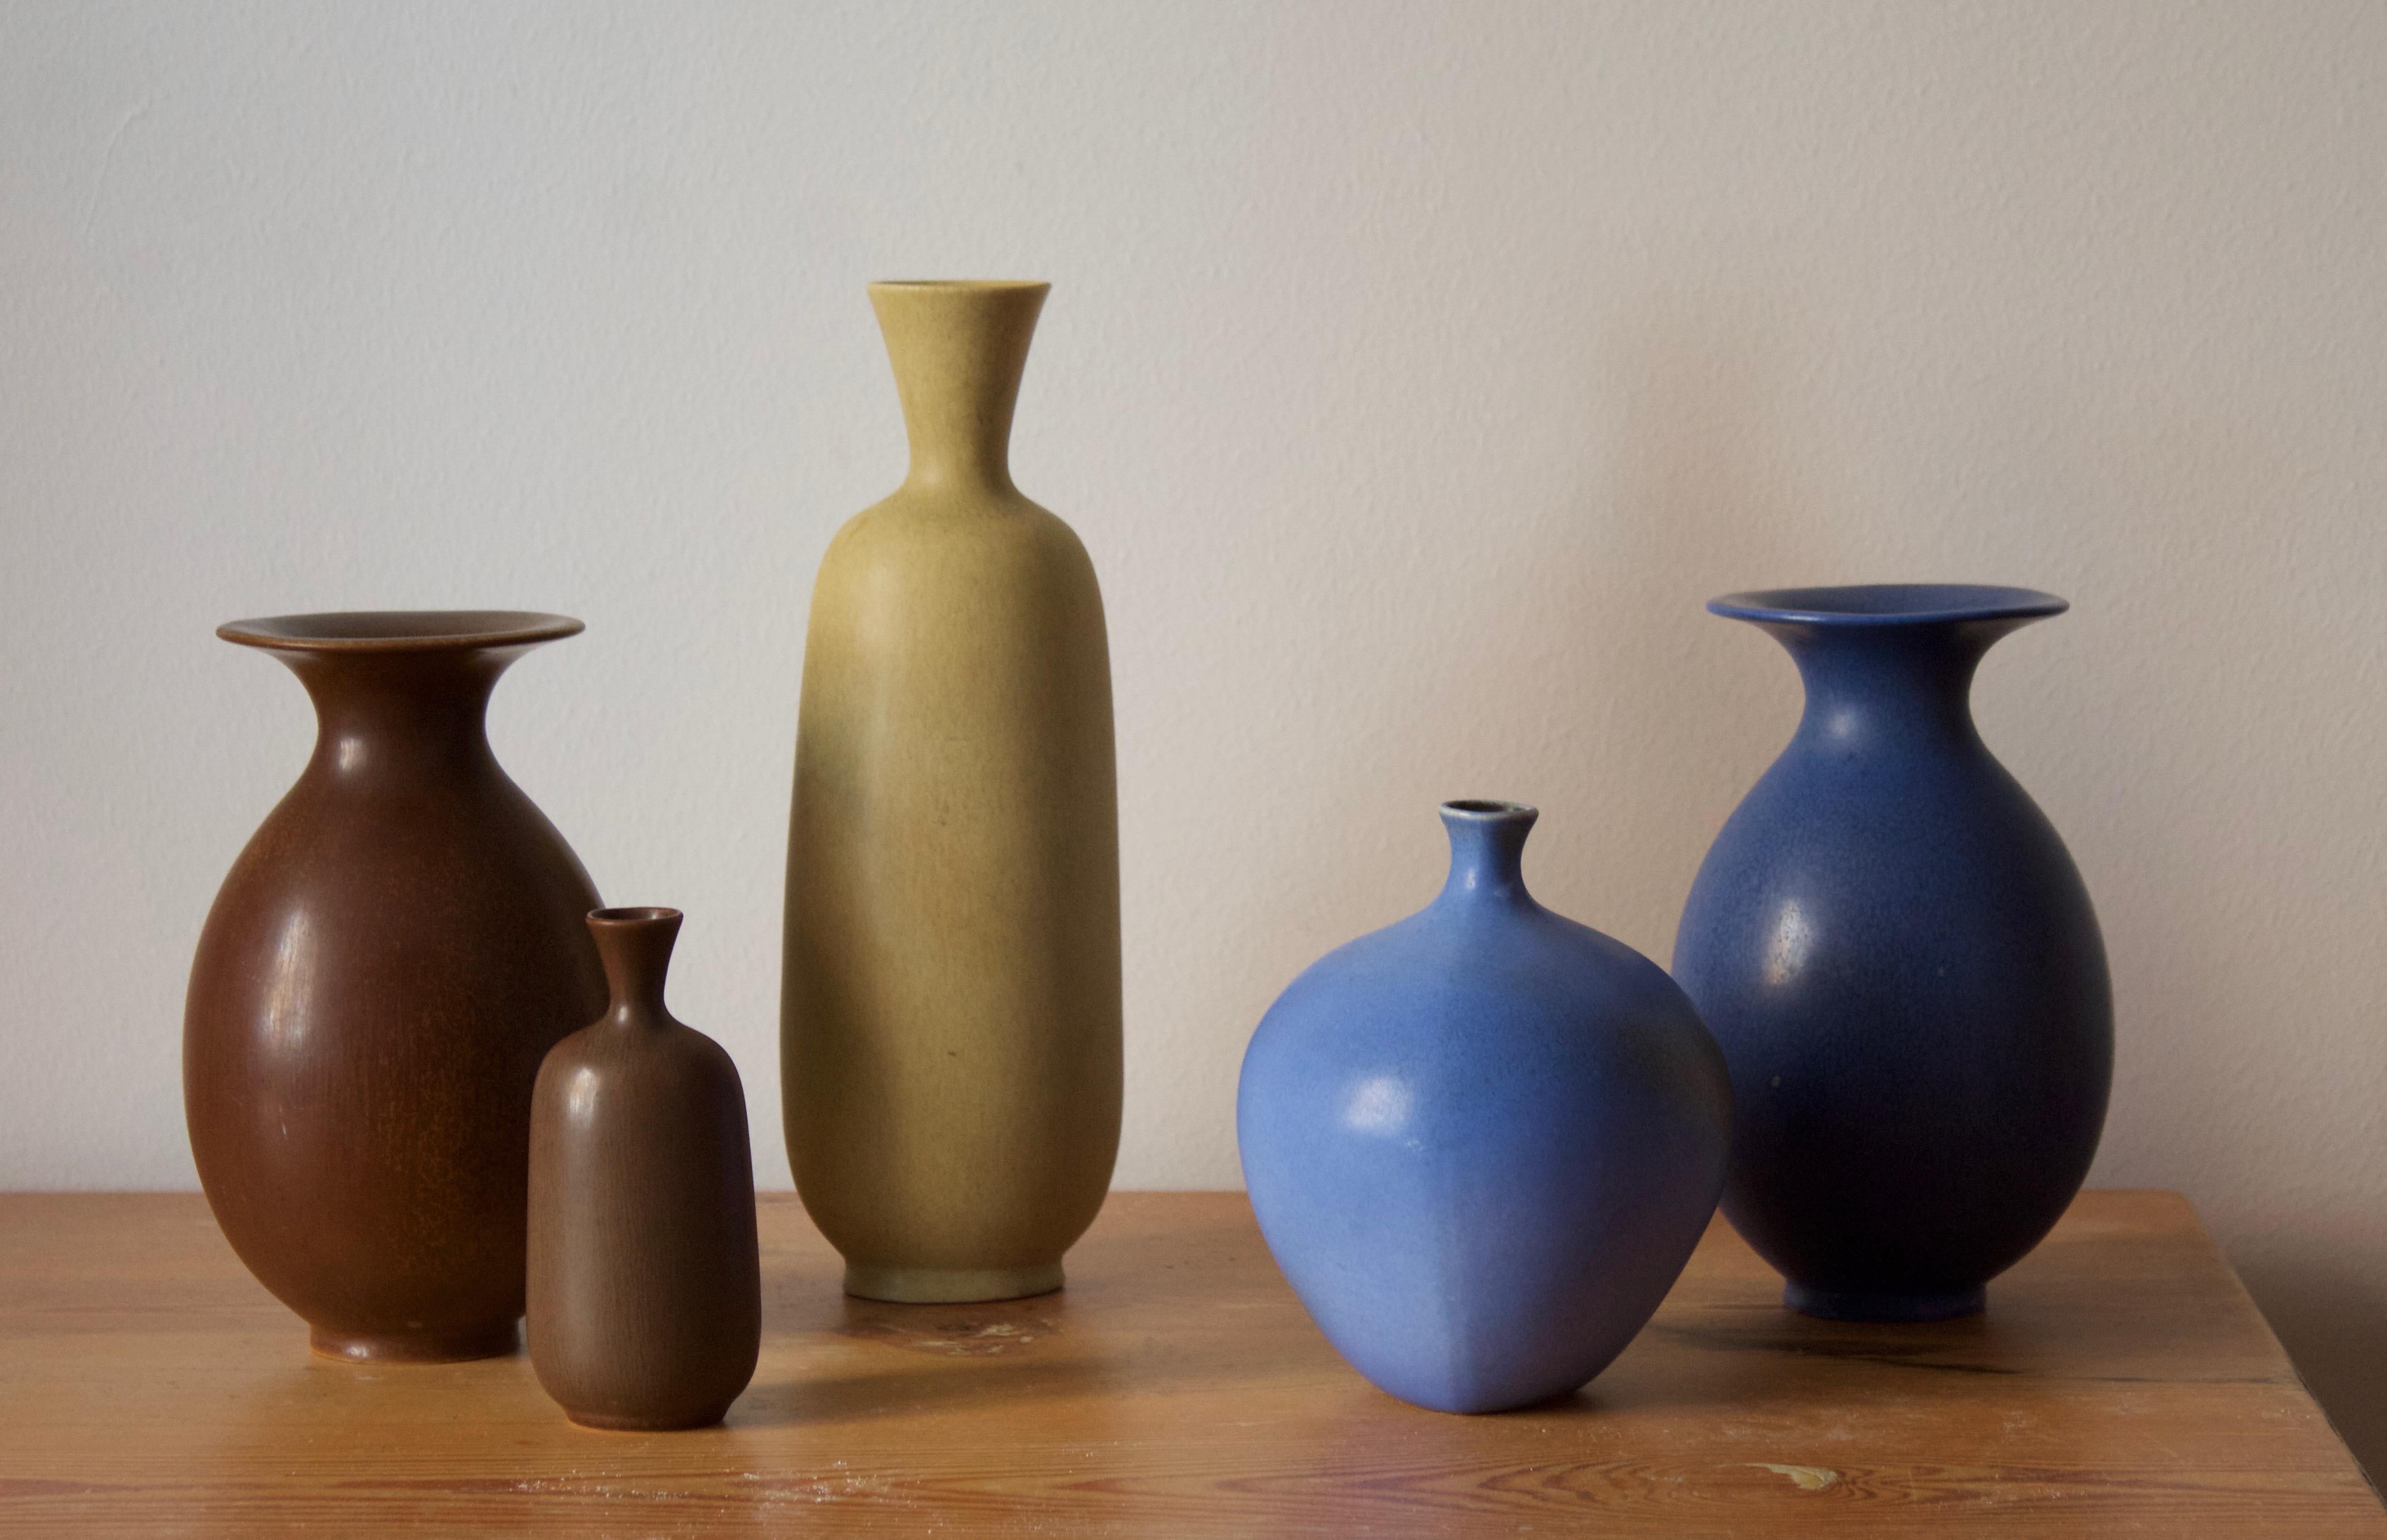 A group of 5 organically shaped vases, all with simple monochrome glazing. Designed by Berndt Friberg for the Swedish firm Gustavsberg. Some with paper labels and stickers to backside. 

Stated dimensions are off the tallest brown vase.

Other